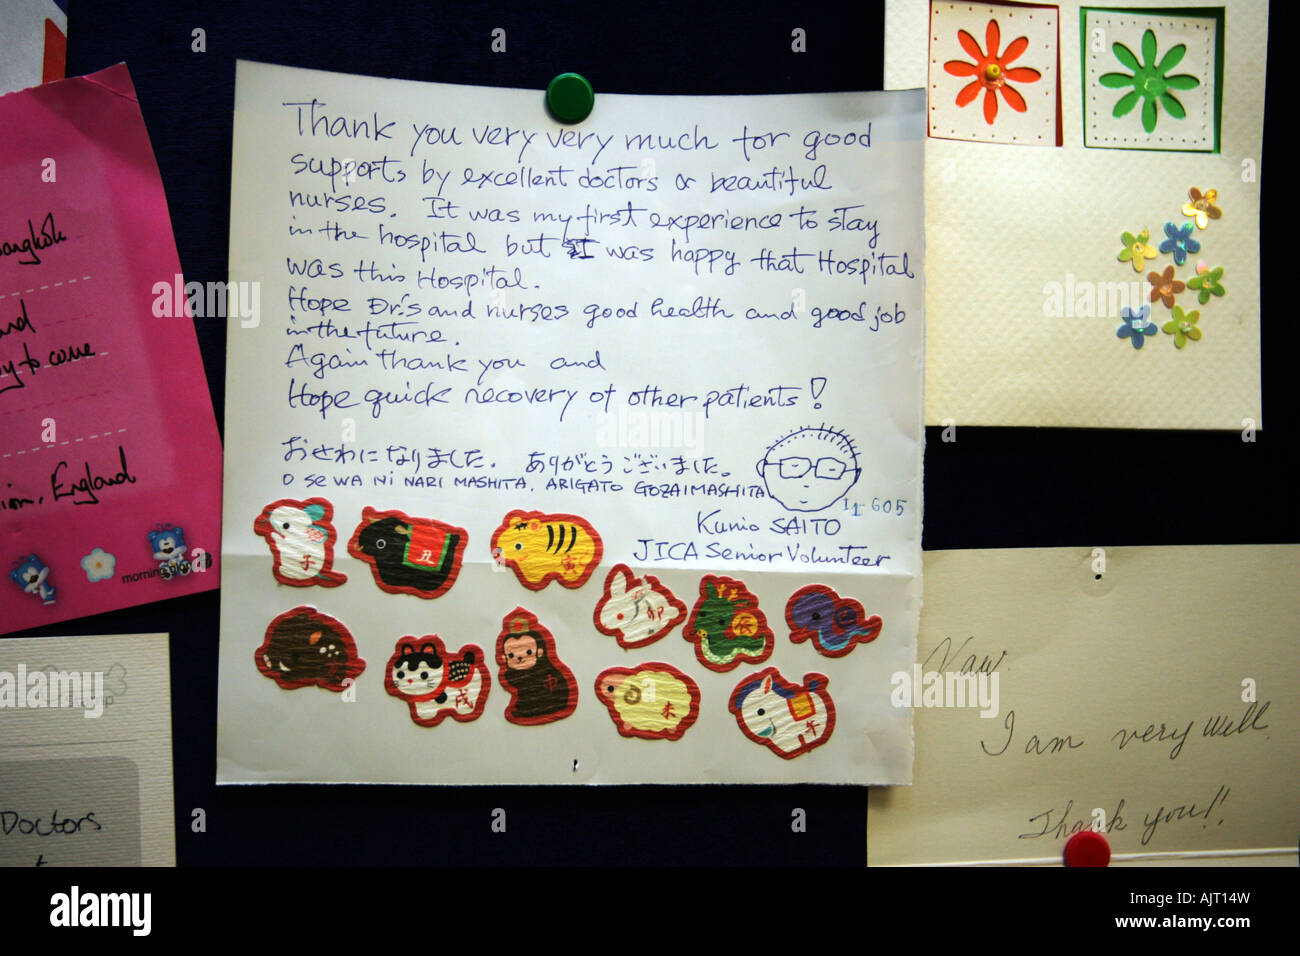 Cards sent to the staff at The Bangkok Hospital from patients who express their satisfaction. Stock Photo